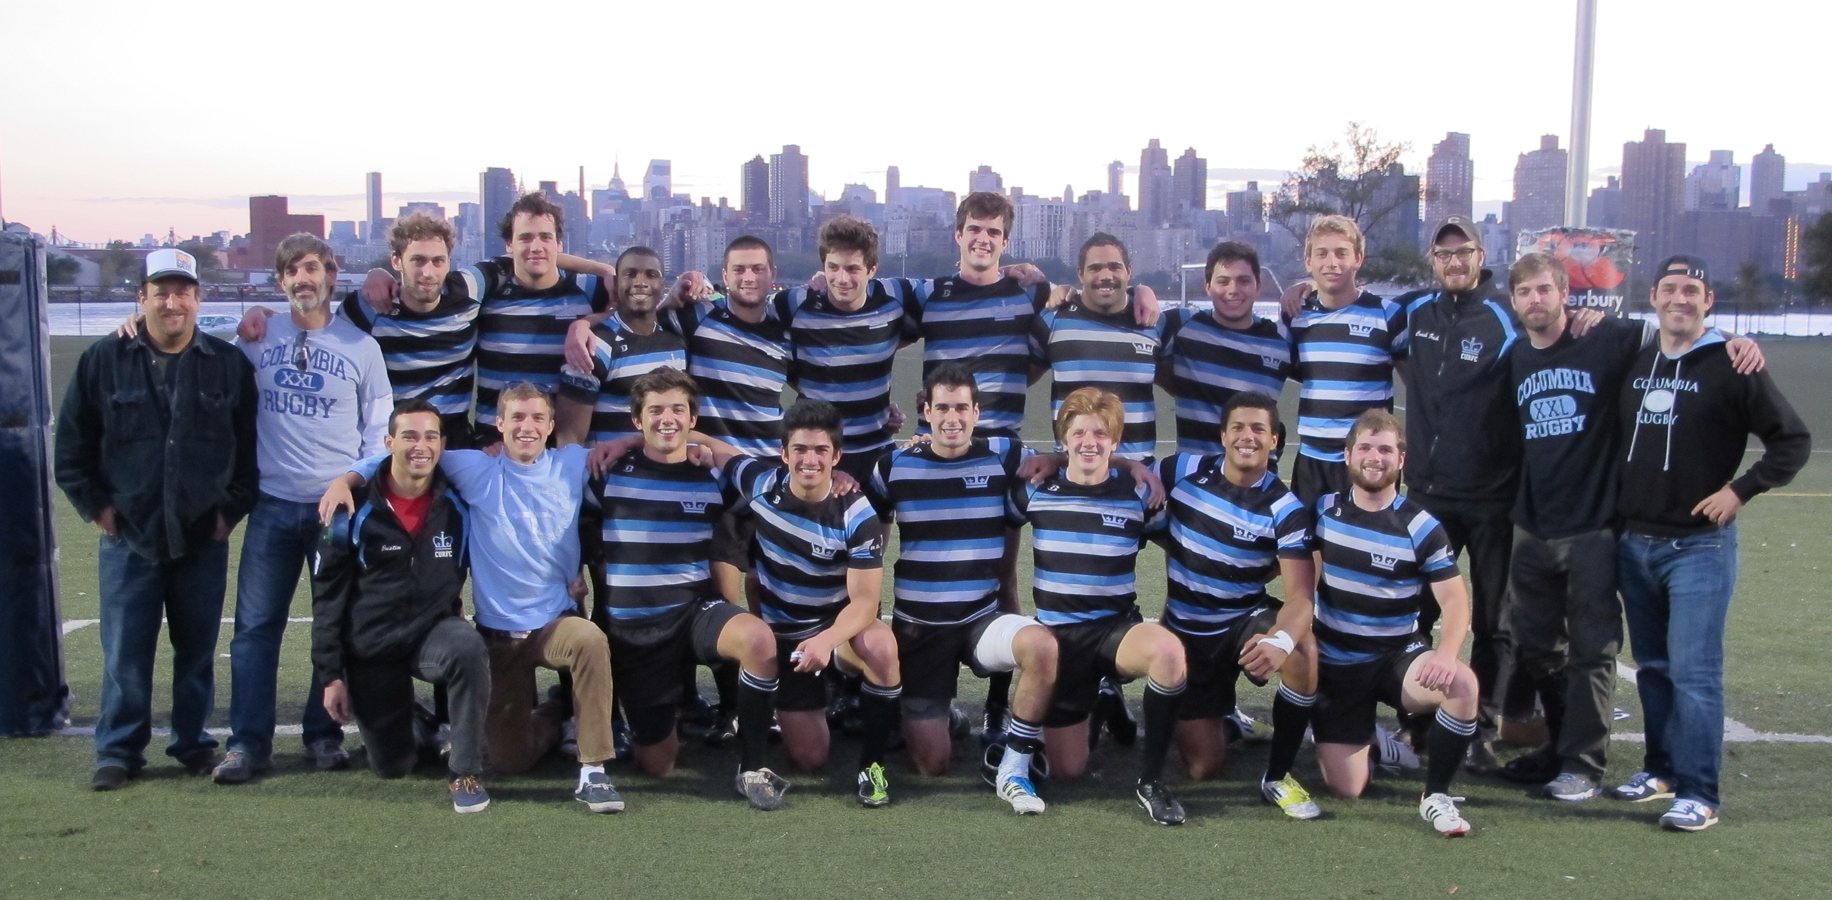 Columbia Men's Rugby Team